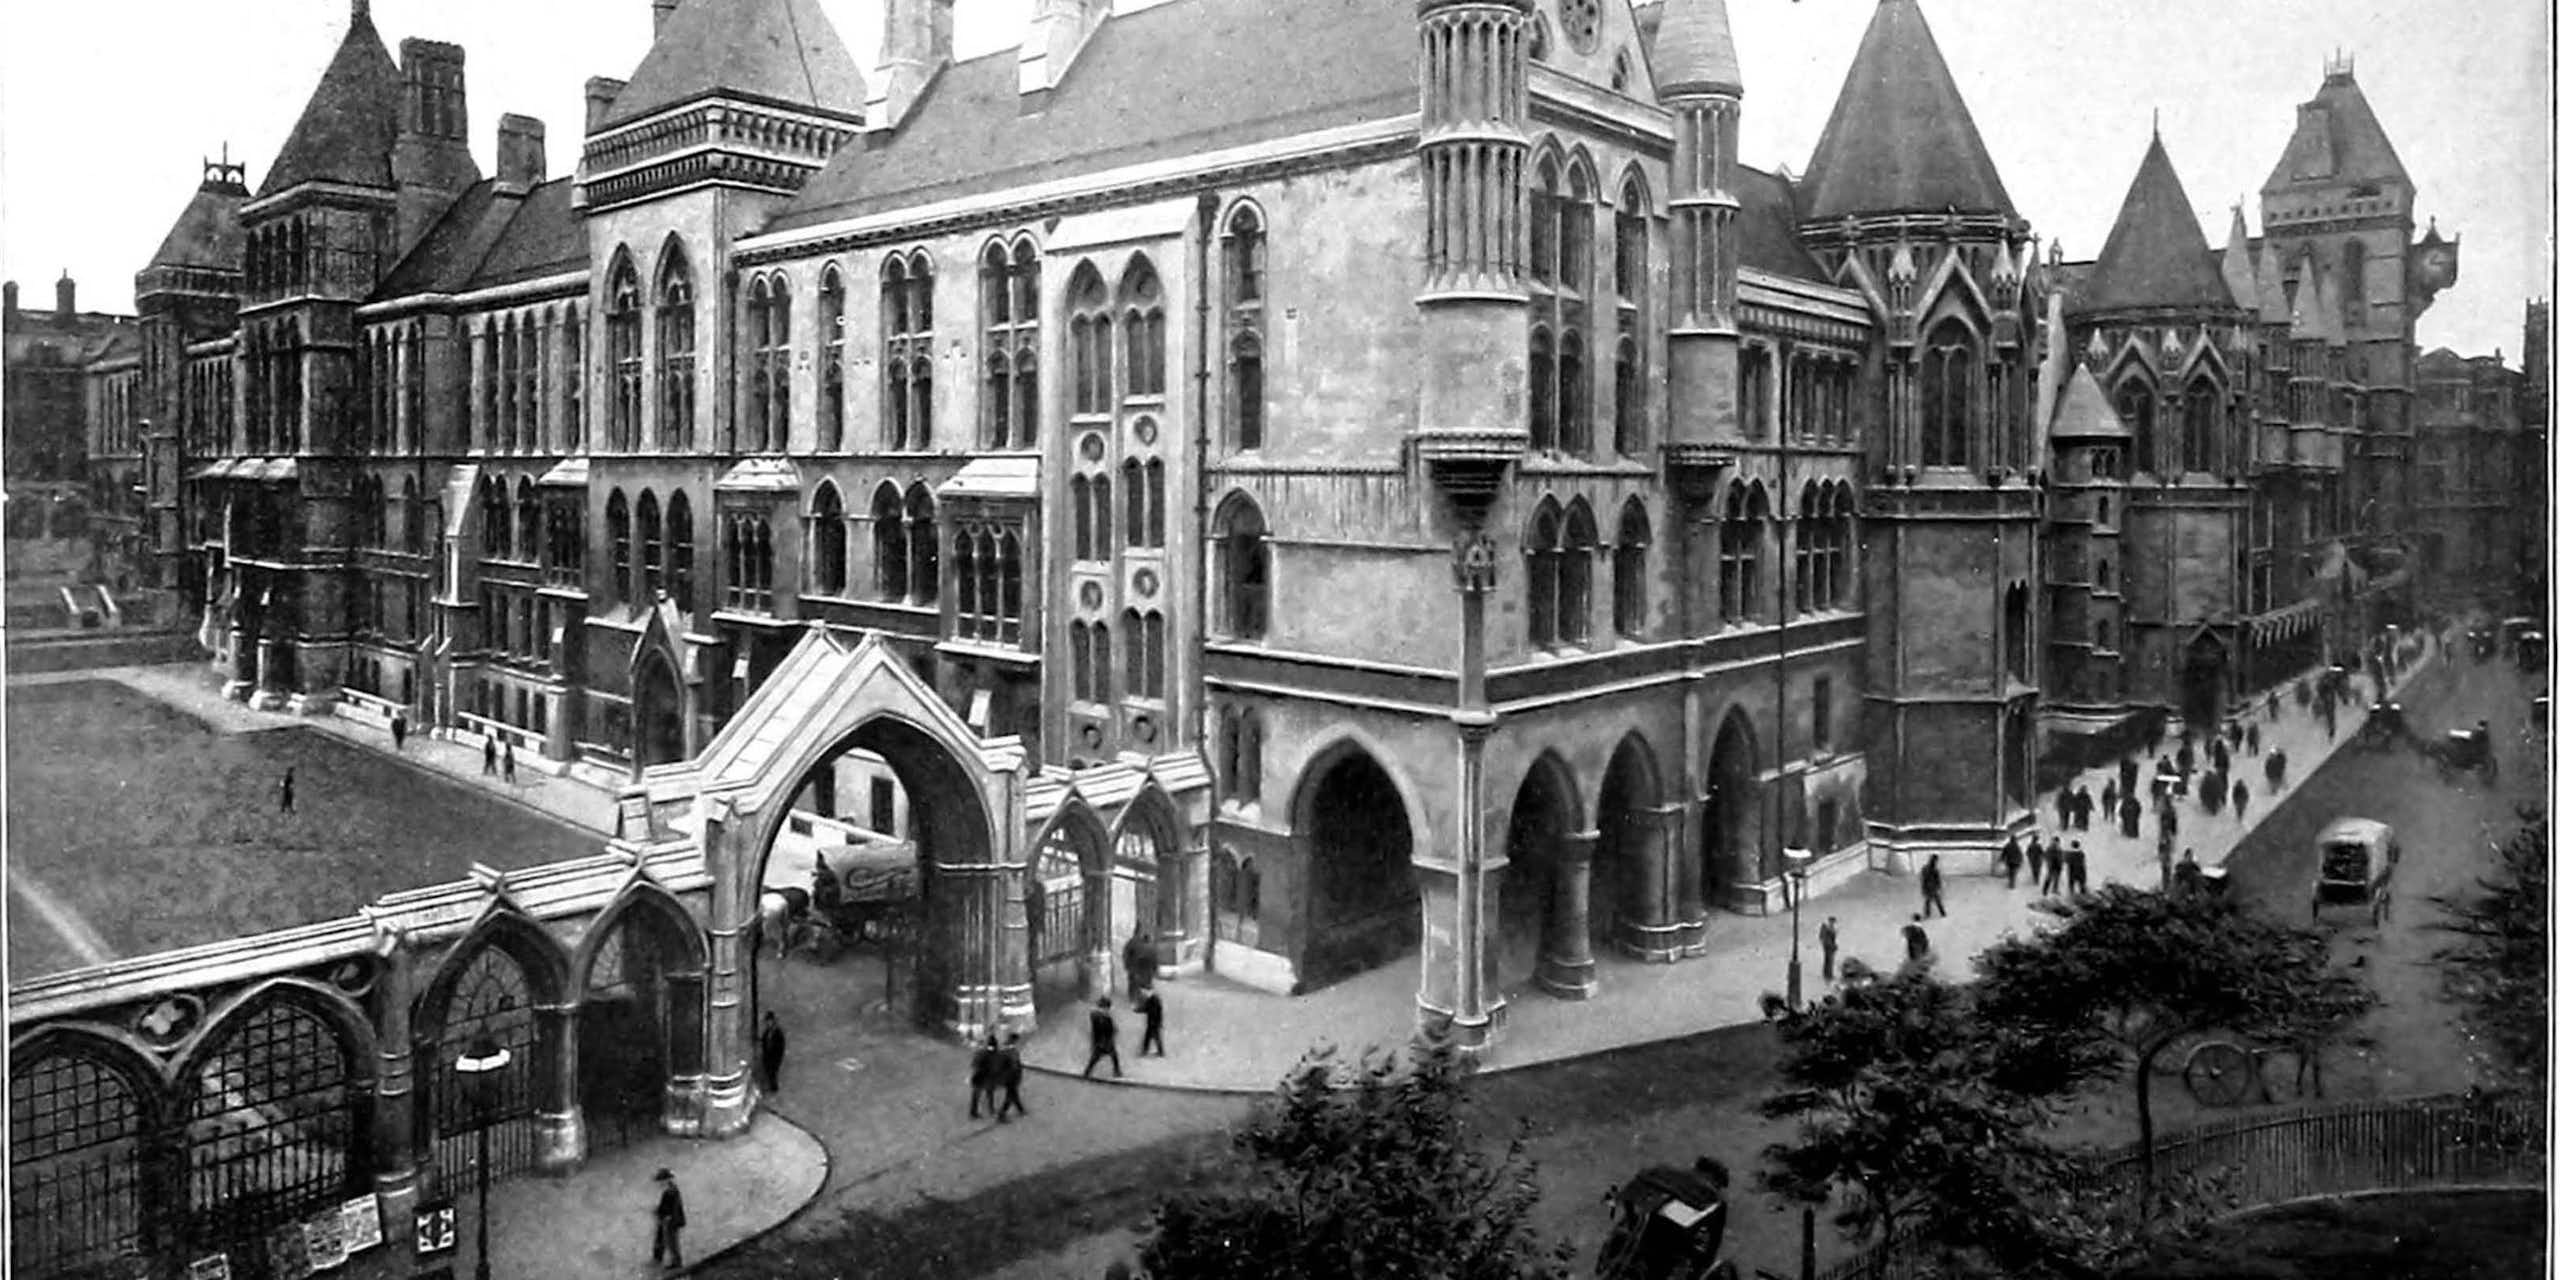 An archival photograph in black and white of a Victorian building complex.